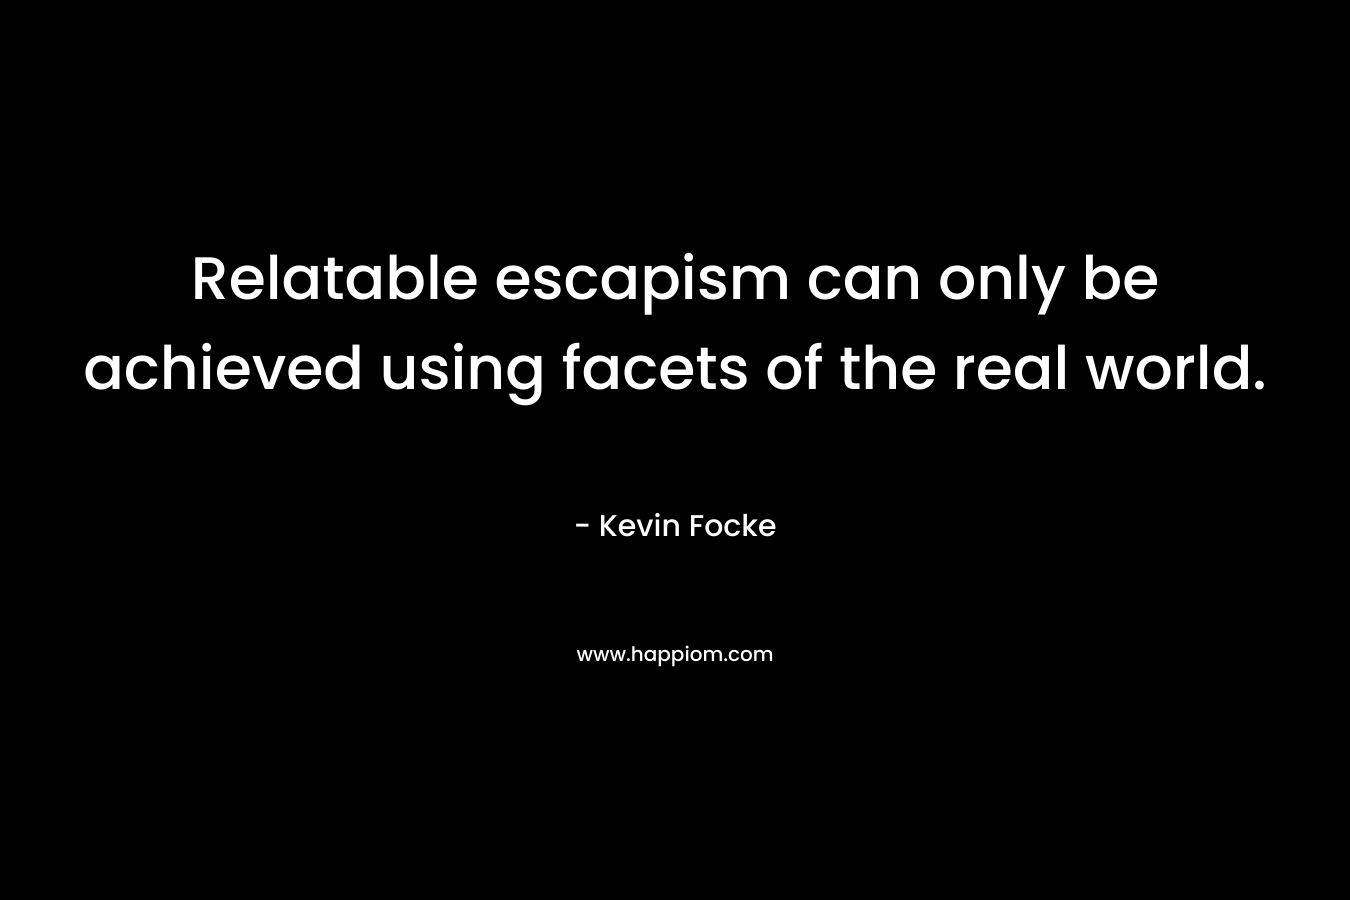 Relatable escapism can only be achieved using facets of the real world. – Kevin Focke